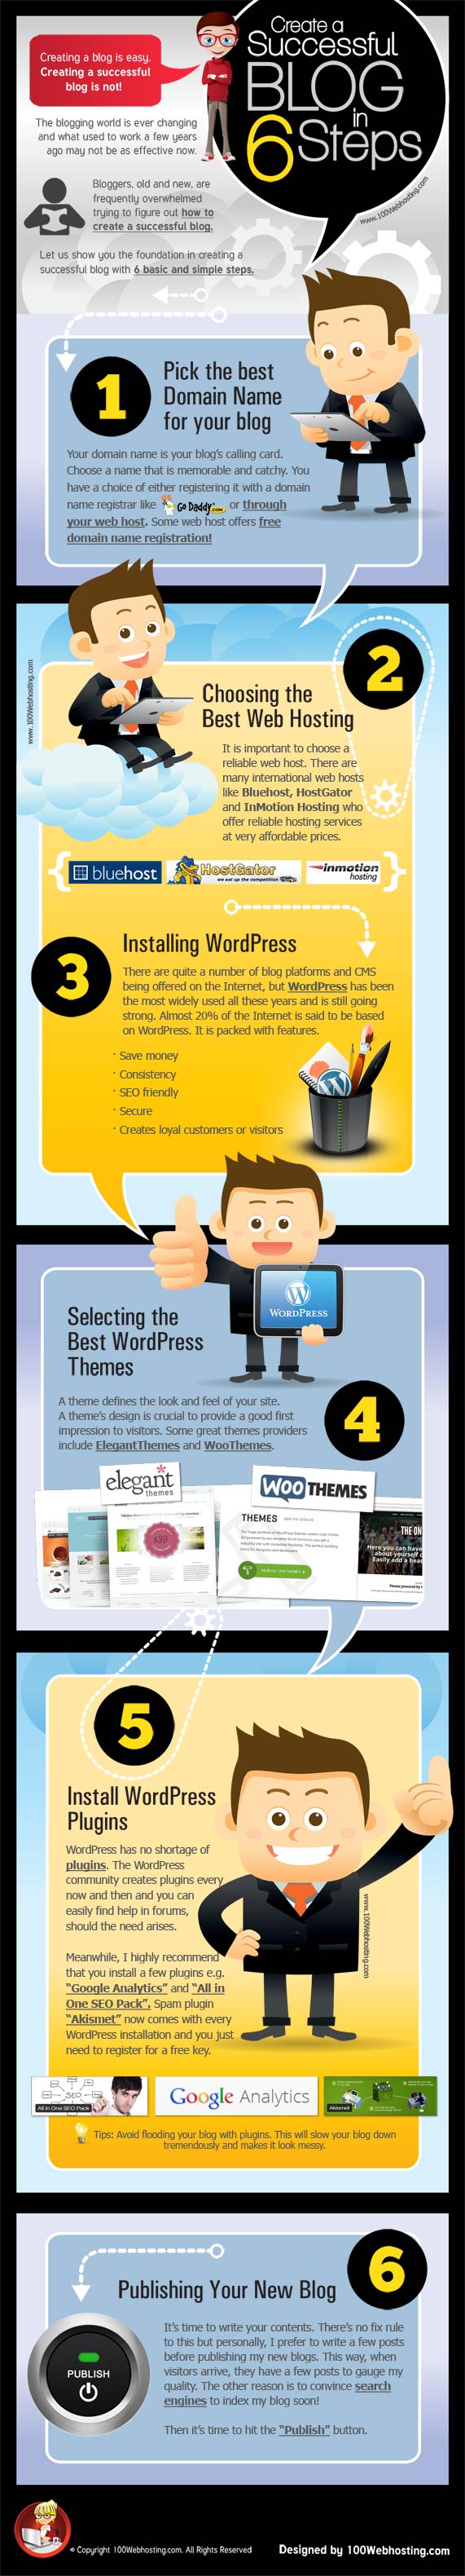 6-Steps-To-Create-A-Successful-WordPress-Blog-Infographic